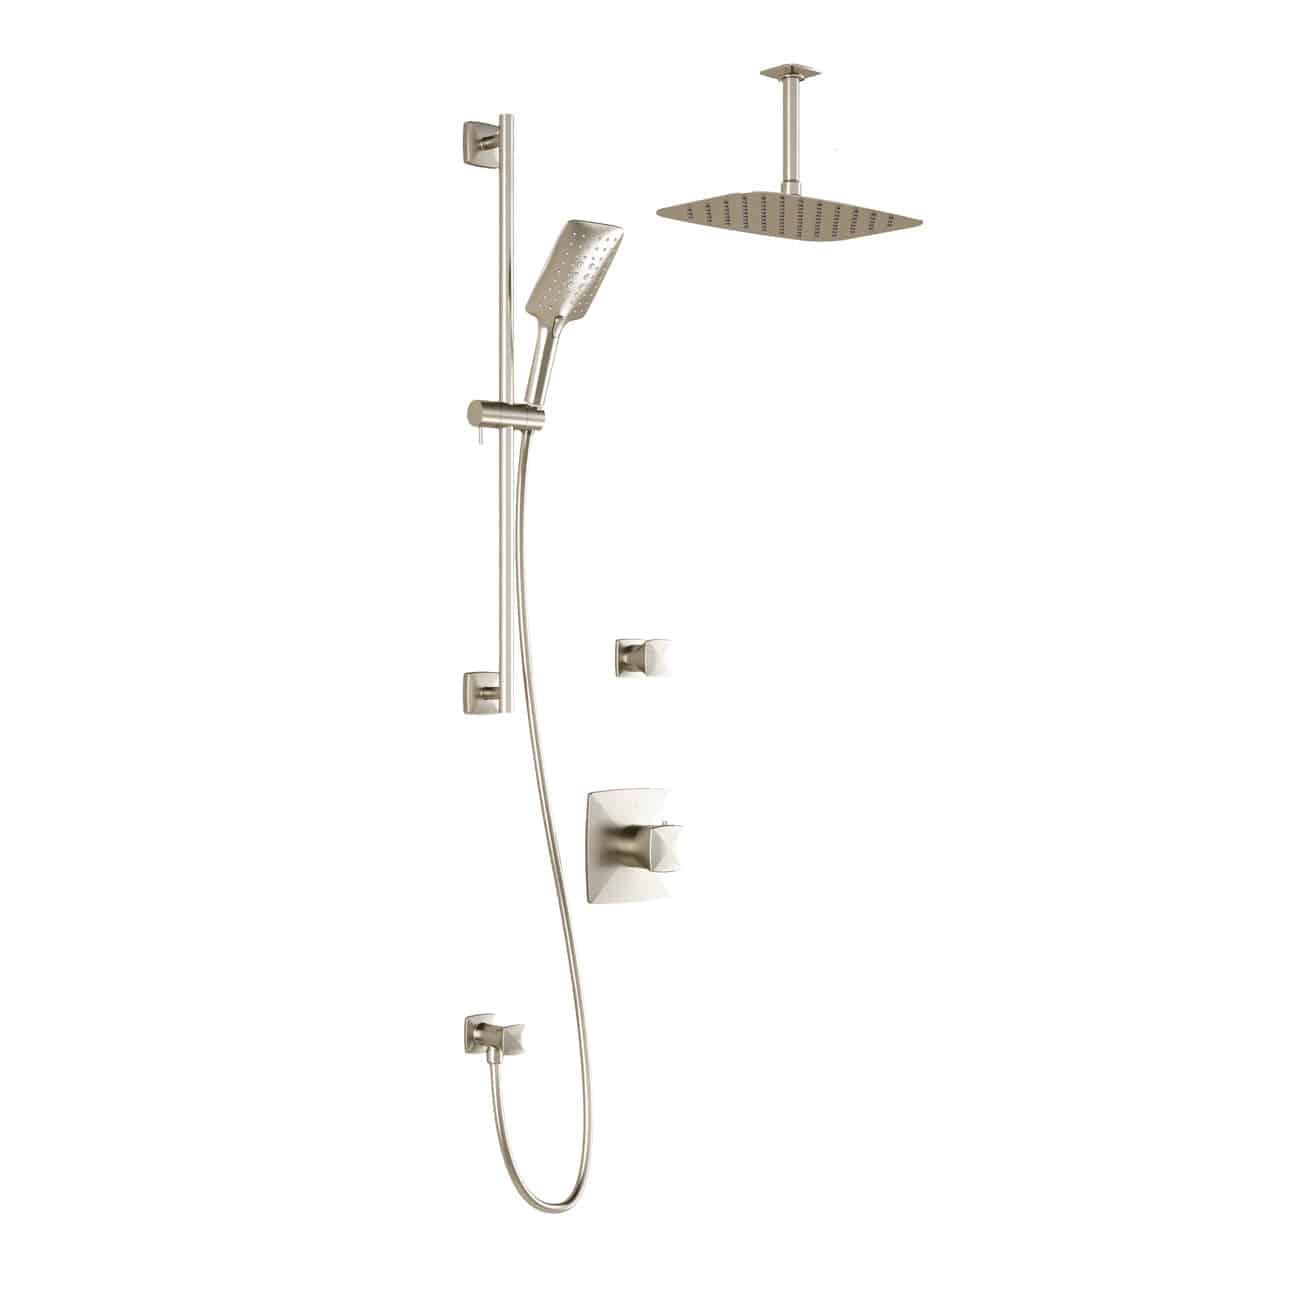 Kalia UMANI T2 PREMIA (Valves Not Included) AQUATONIK T/P Shower System with Vertical Ceiling Arm and 12" Rectangle Rain Shower Head- Brushed Nickel PVD